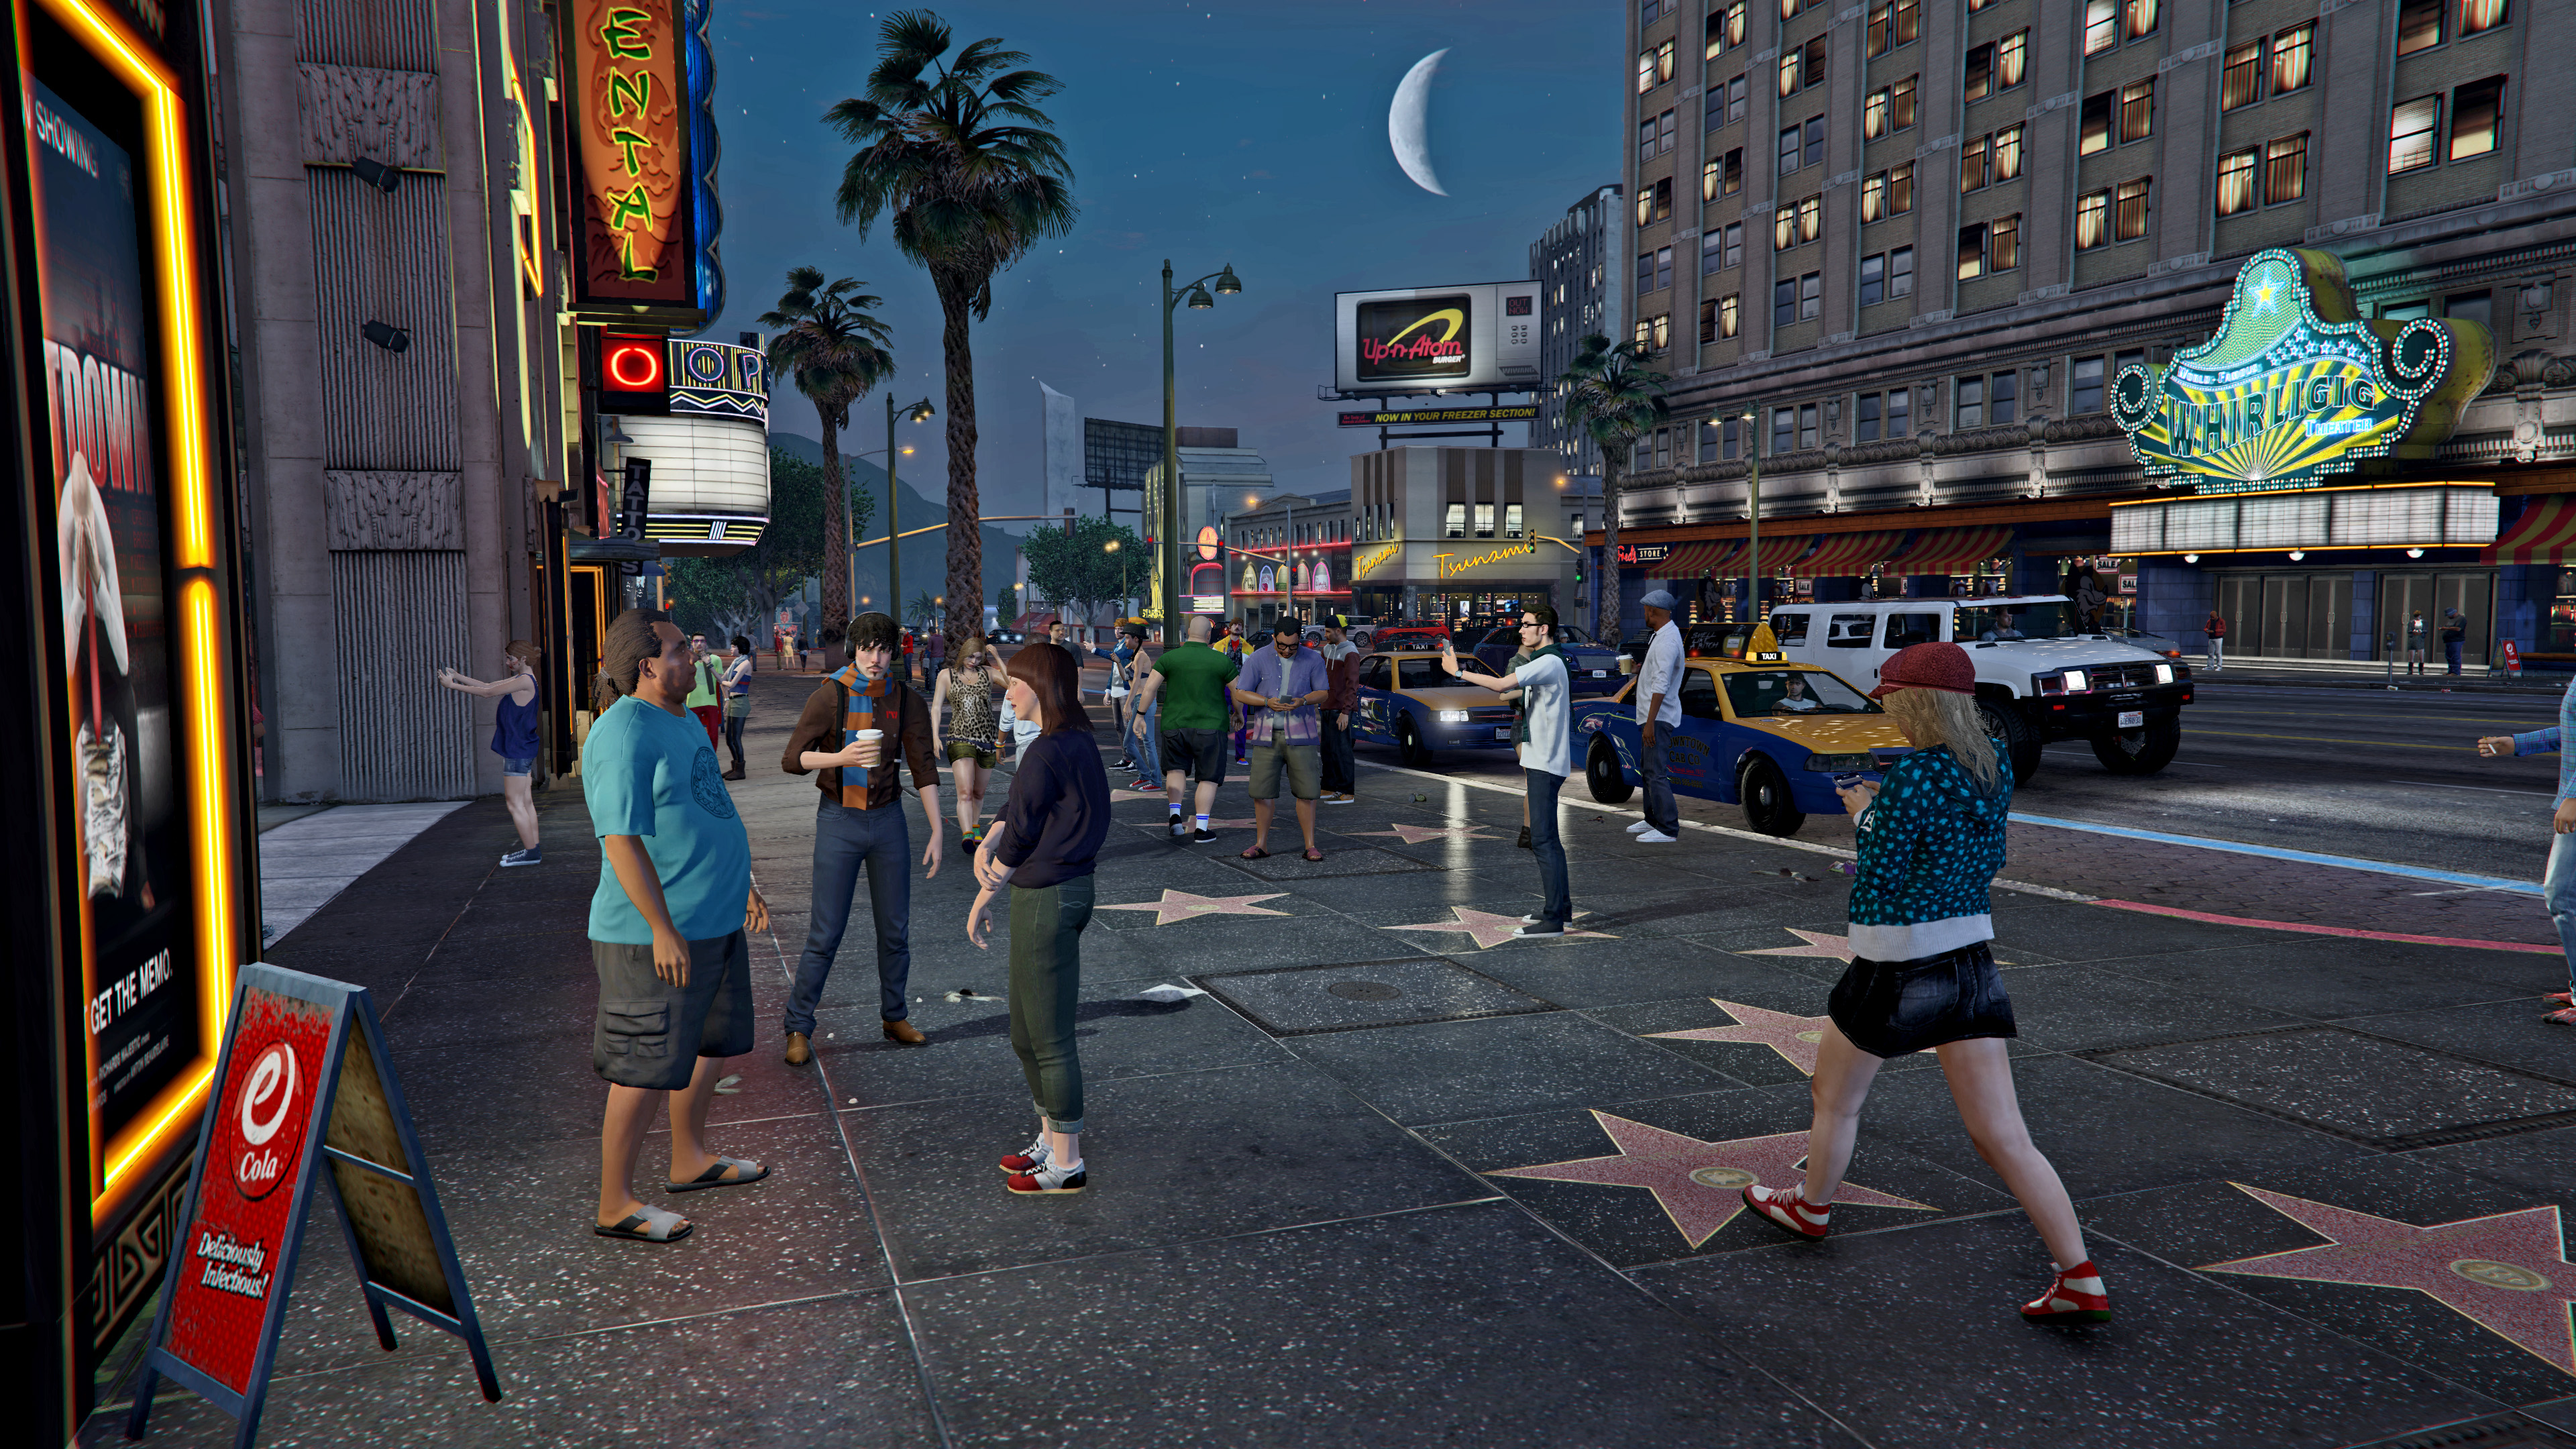 grand theft auto v, video game, grand theft auto, people, street